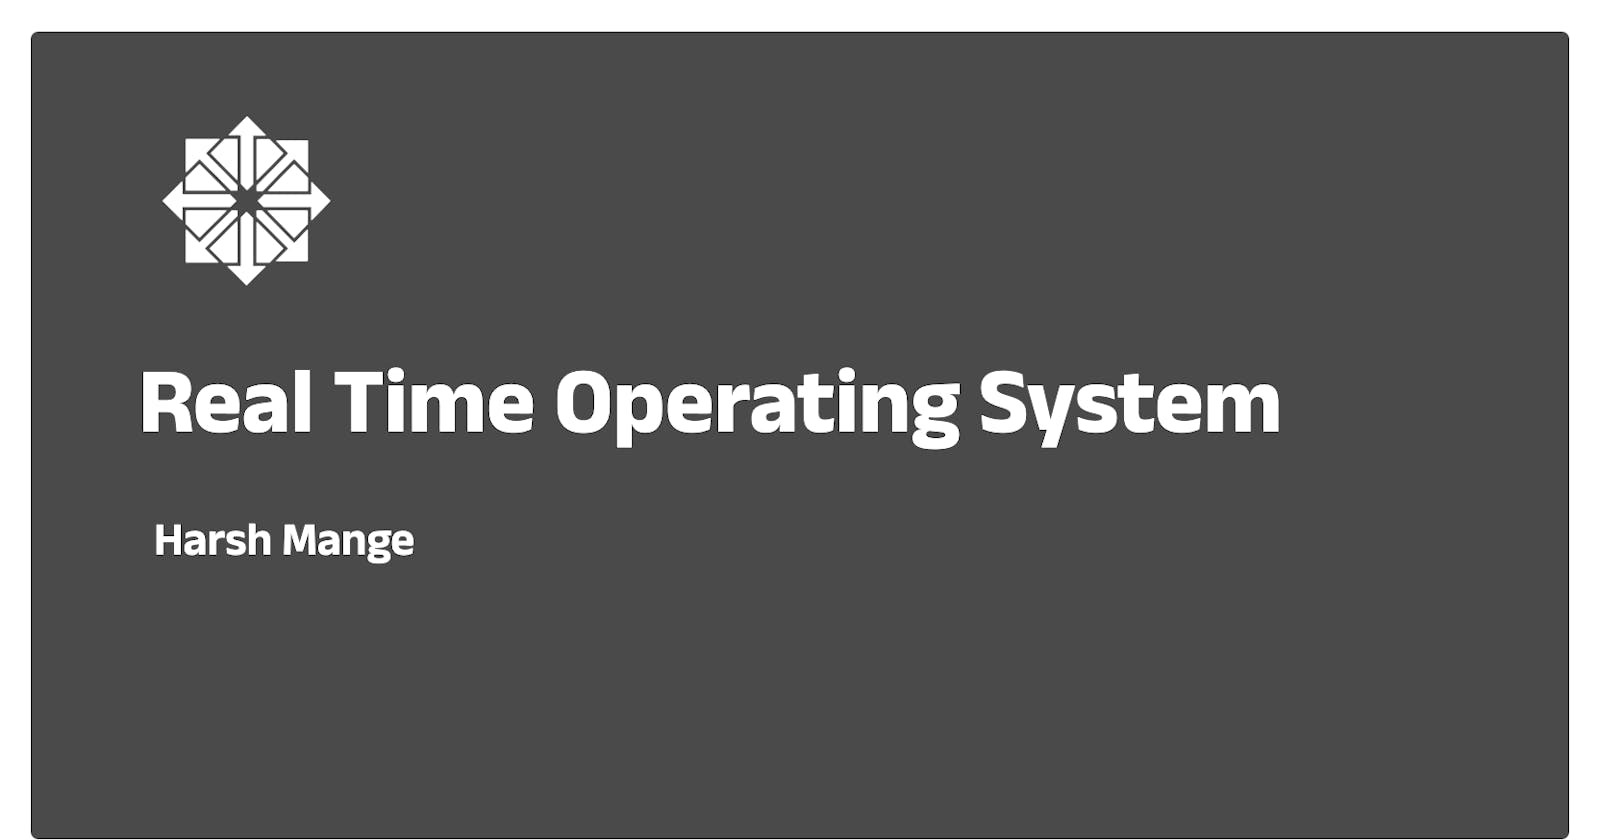 What is Real Time Operating System?